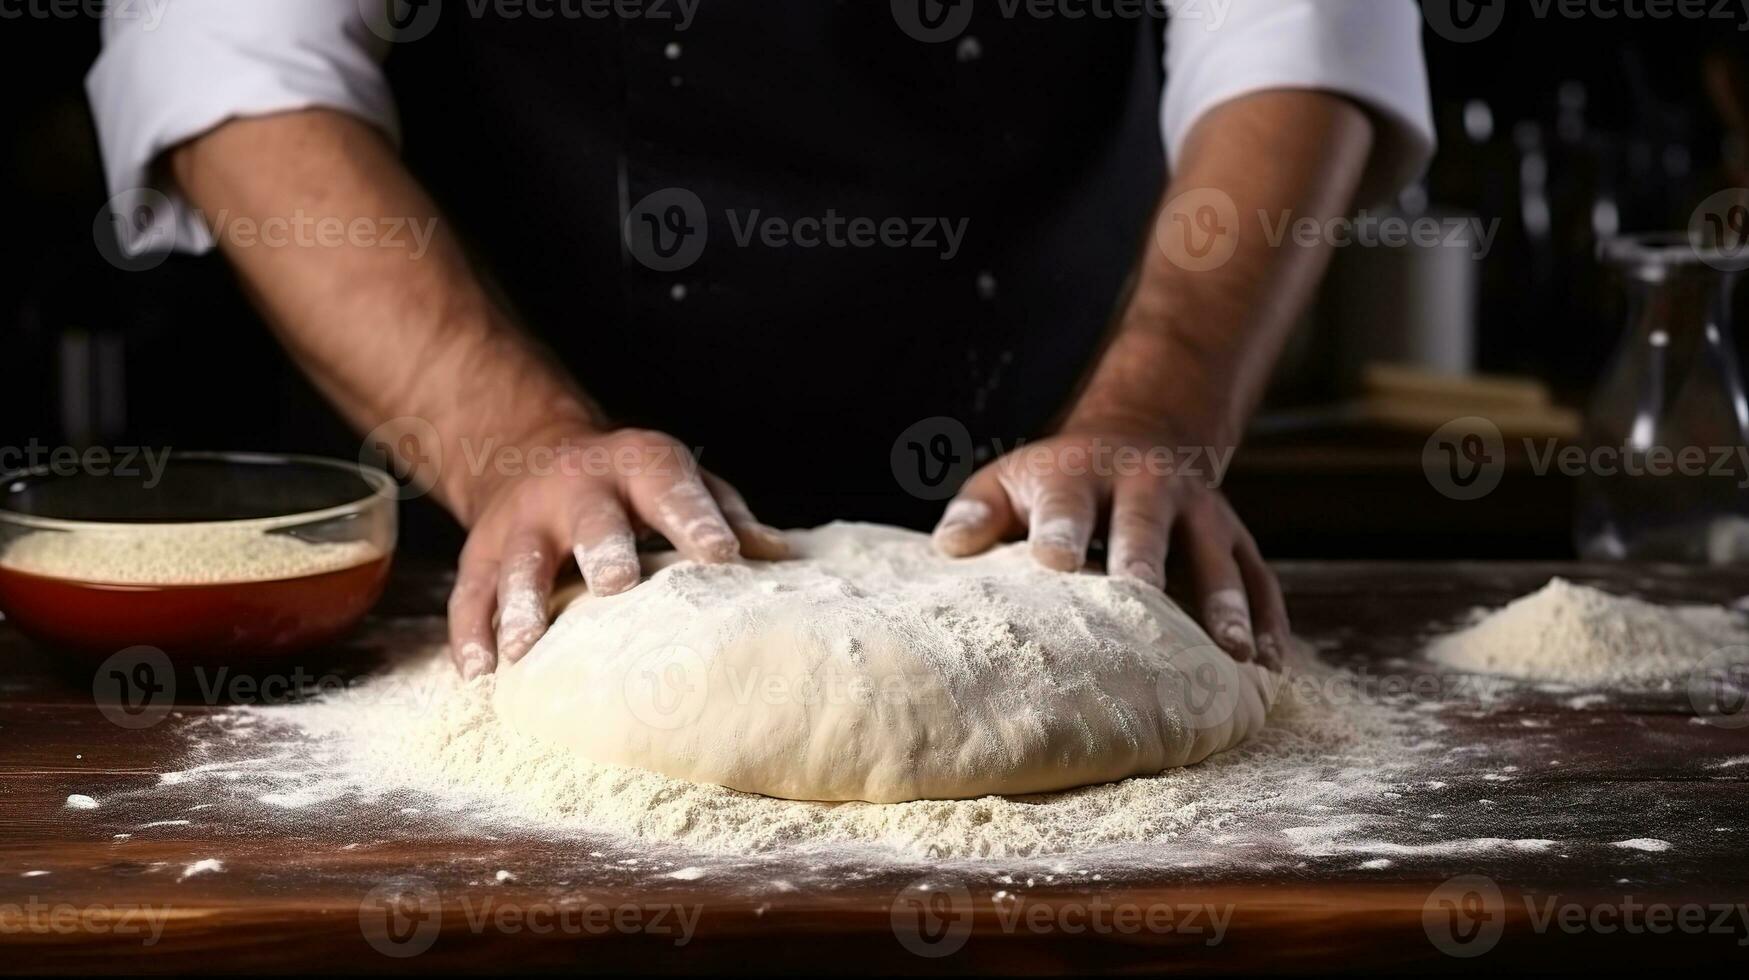 The process of preparing dough in the kitchen. Close-up of male hands kneading dough on wooden table photo